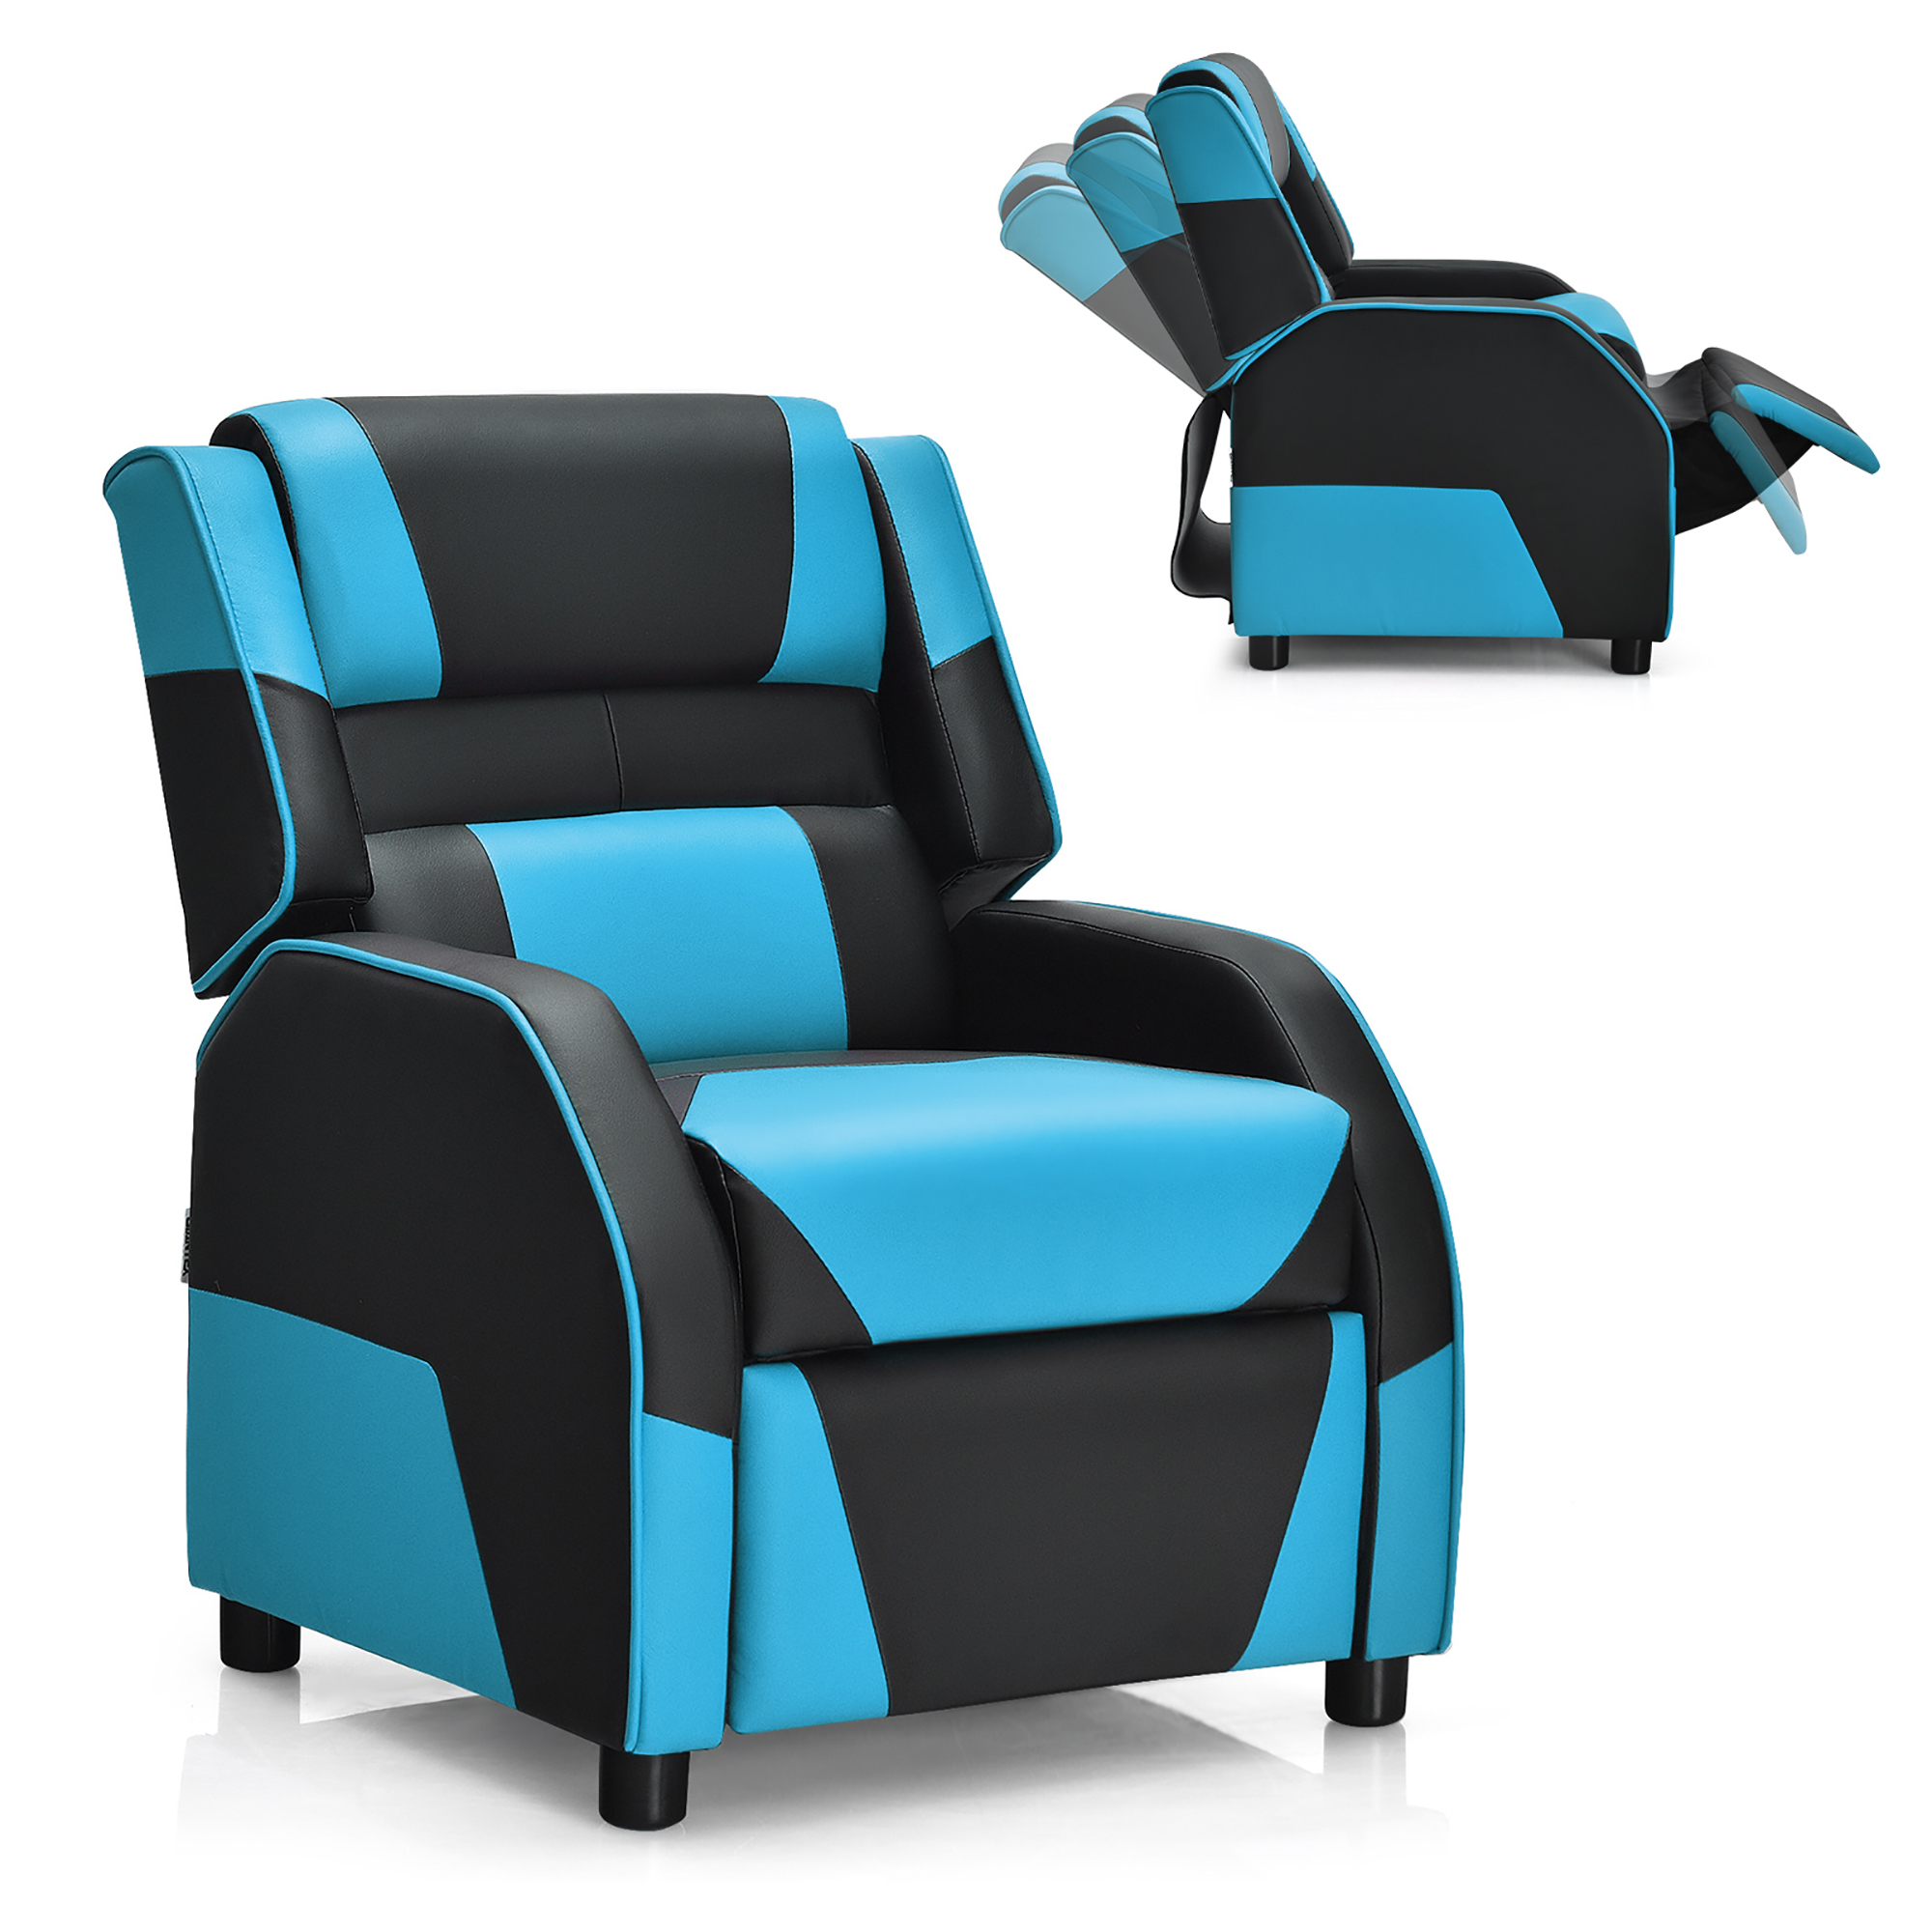 Costway Kids Youth Gaming Sofa Recliner w/Headrest & Footrest PU Leather Blue